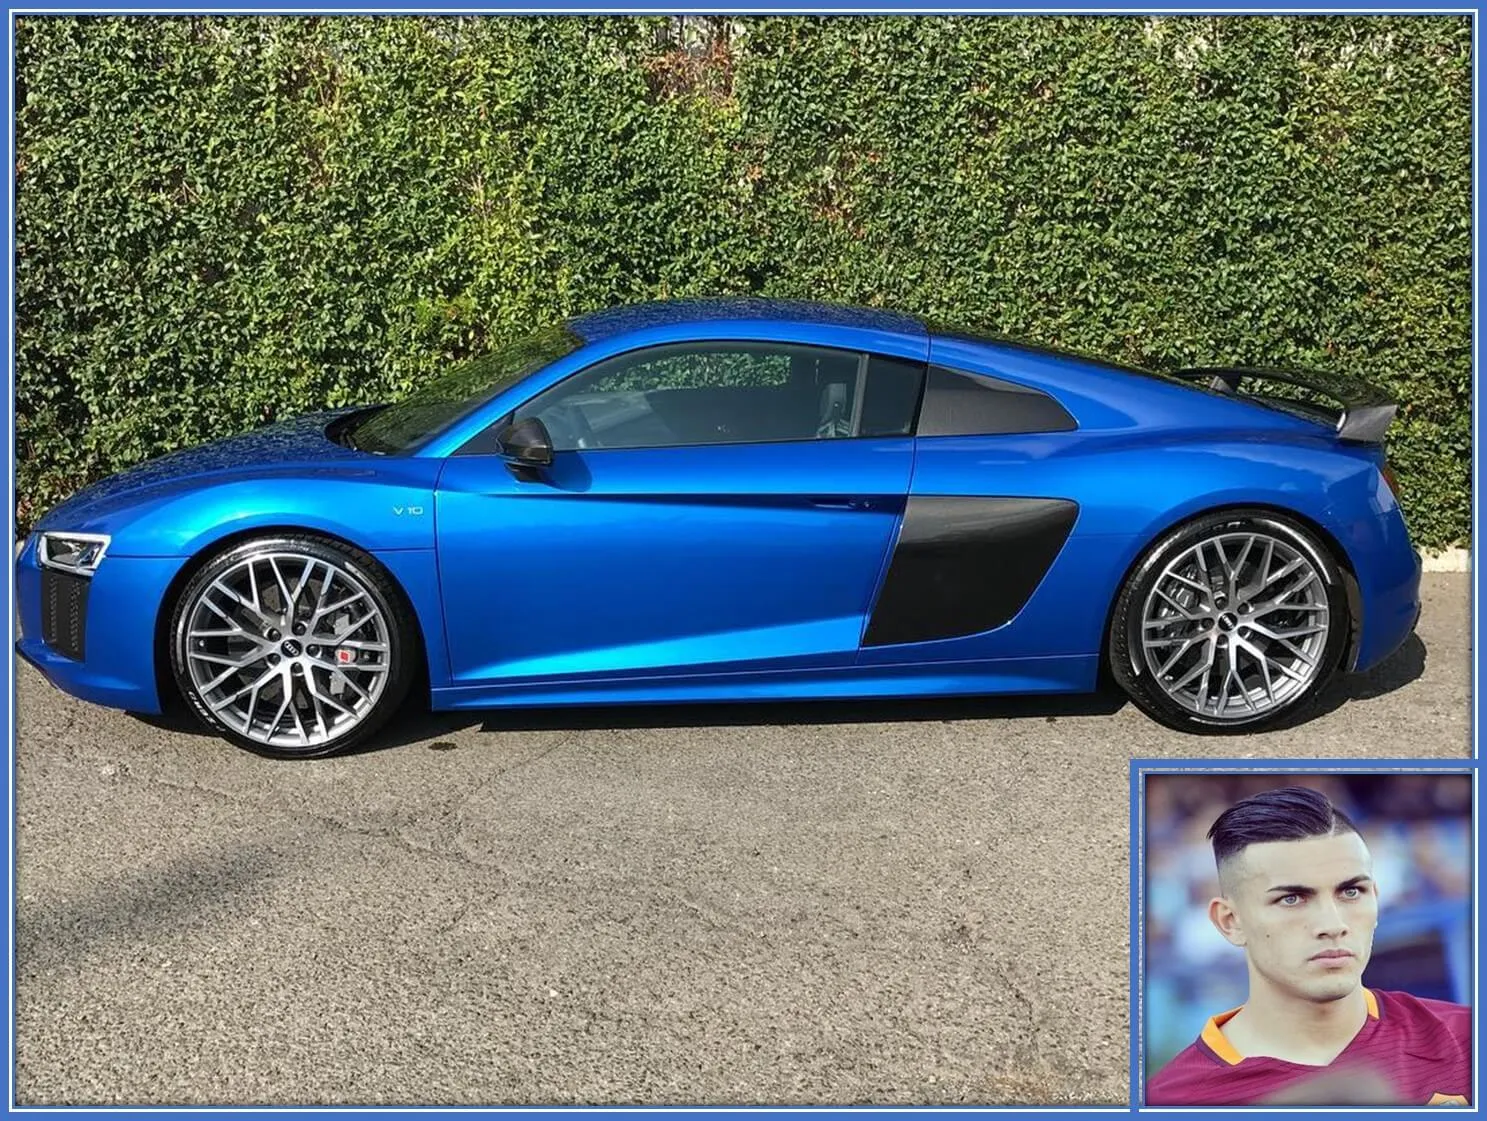 He cruises this exotic blue car. Of course, Paredes has more rides that are as luxurious as this one.